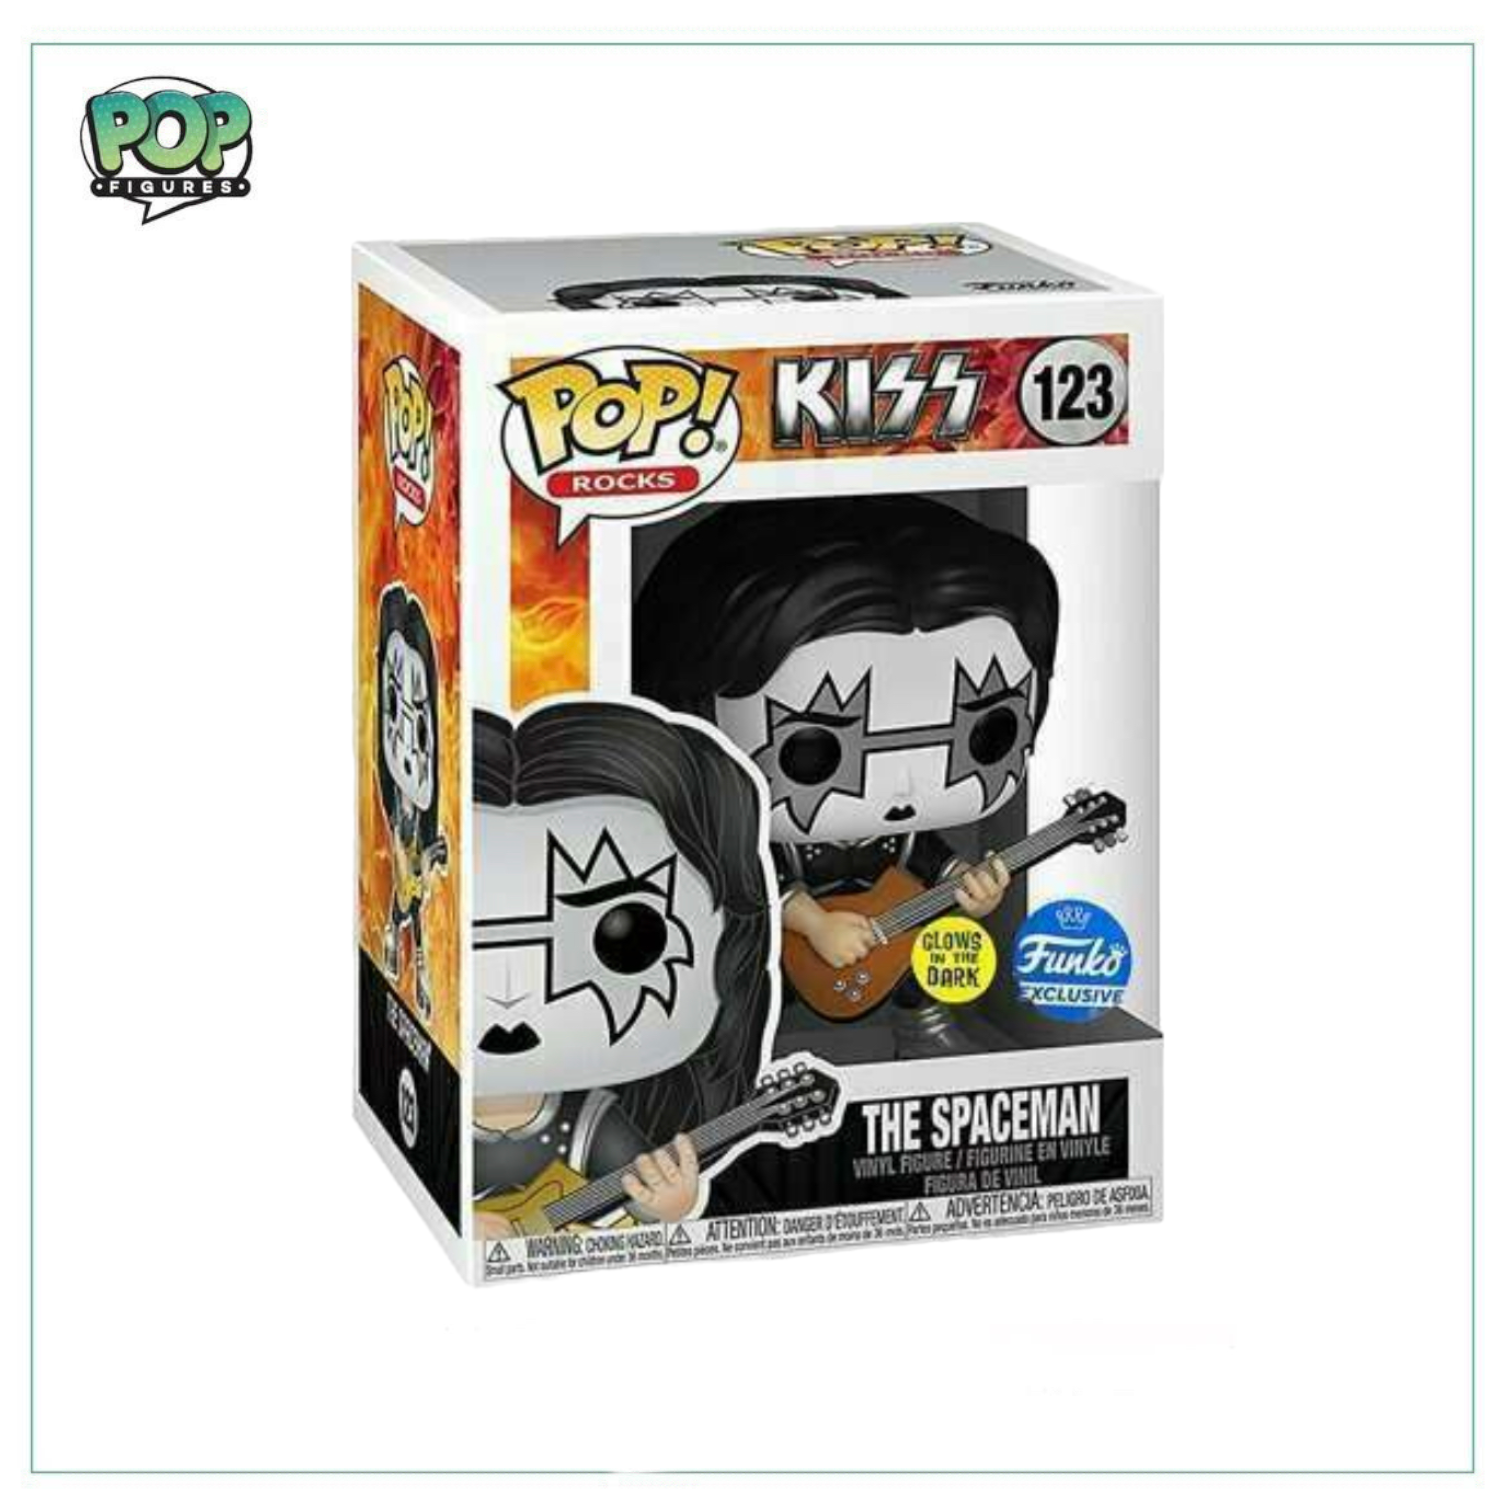 The Spaceman (Glows In The Dark) #123 Funko Pop! Kiss - Funko Exclusive - Angry Cat